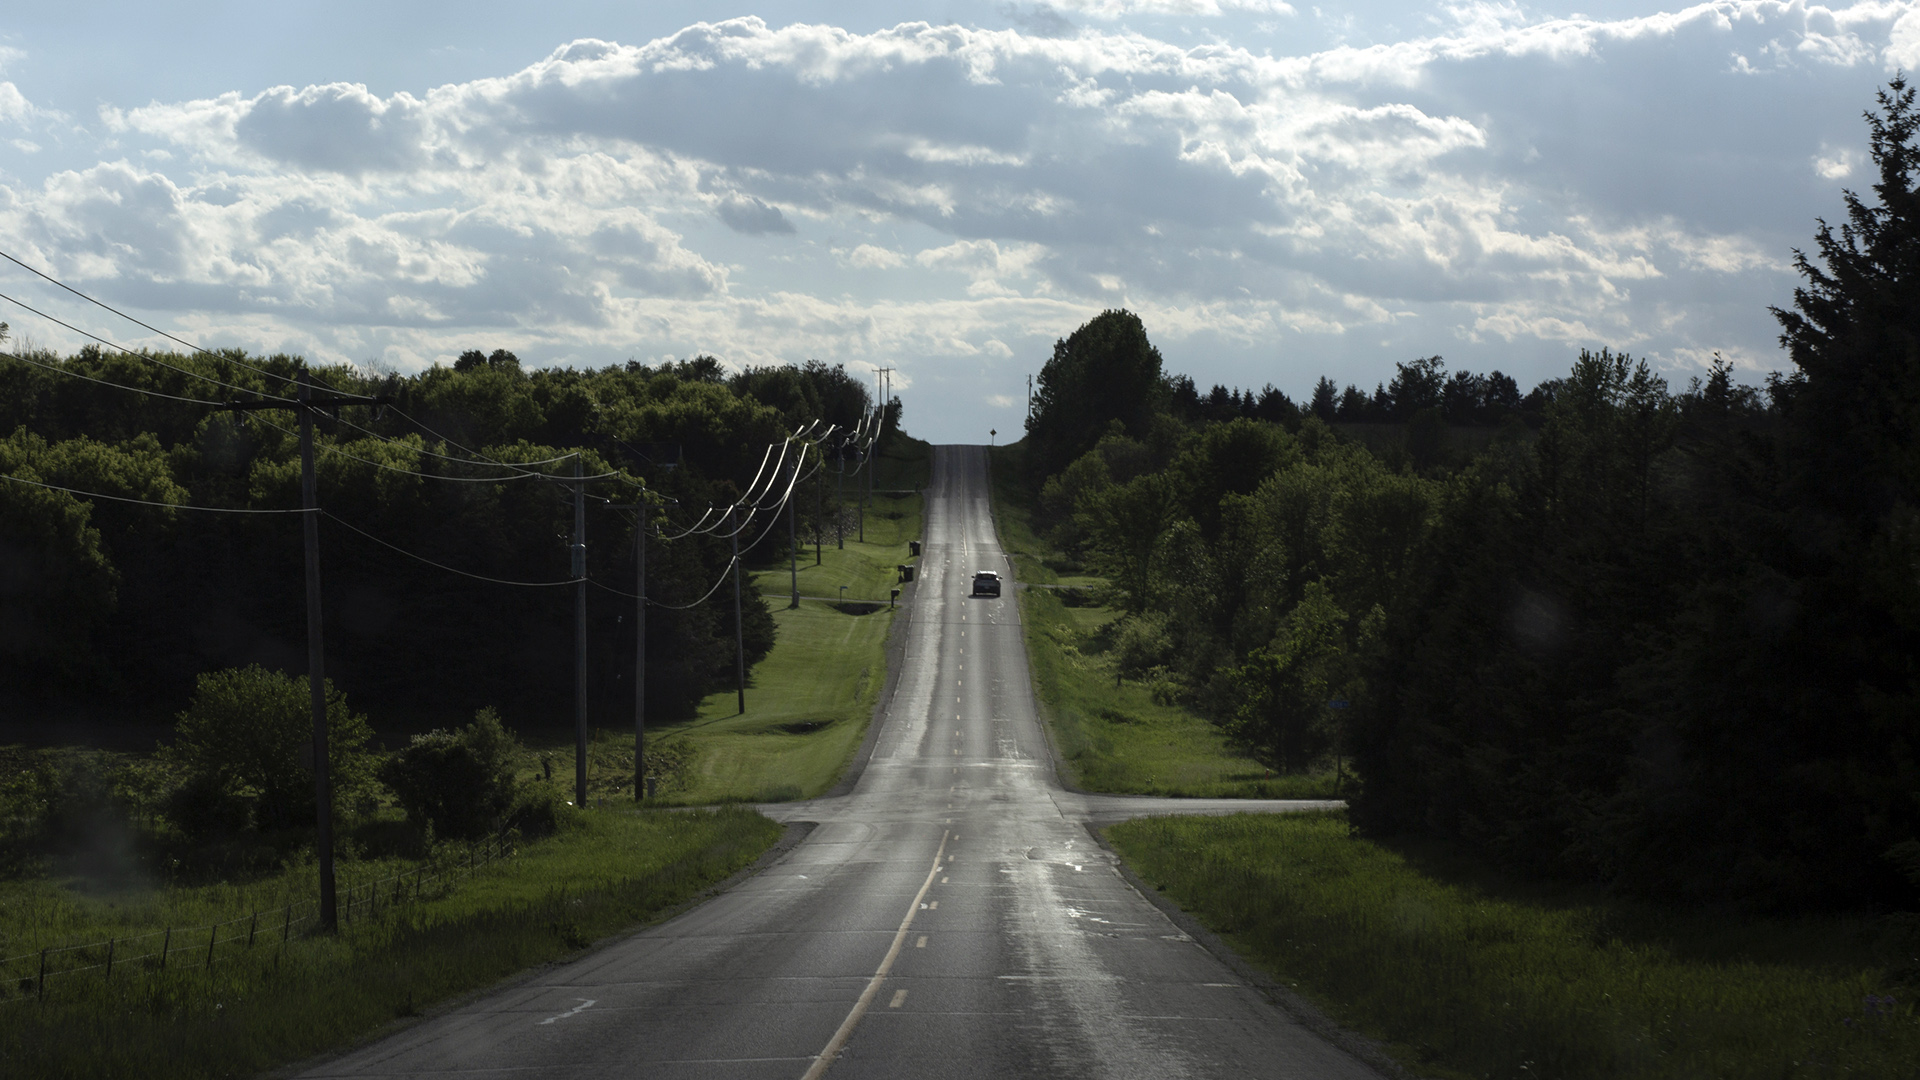 A car drives through a low valley along a two-lane road, with powerlines on one side, trees on both sides, and heavily shadowed clouds in the sky.